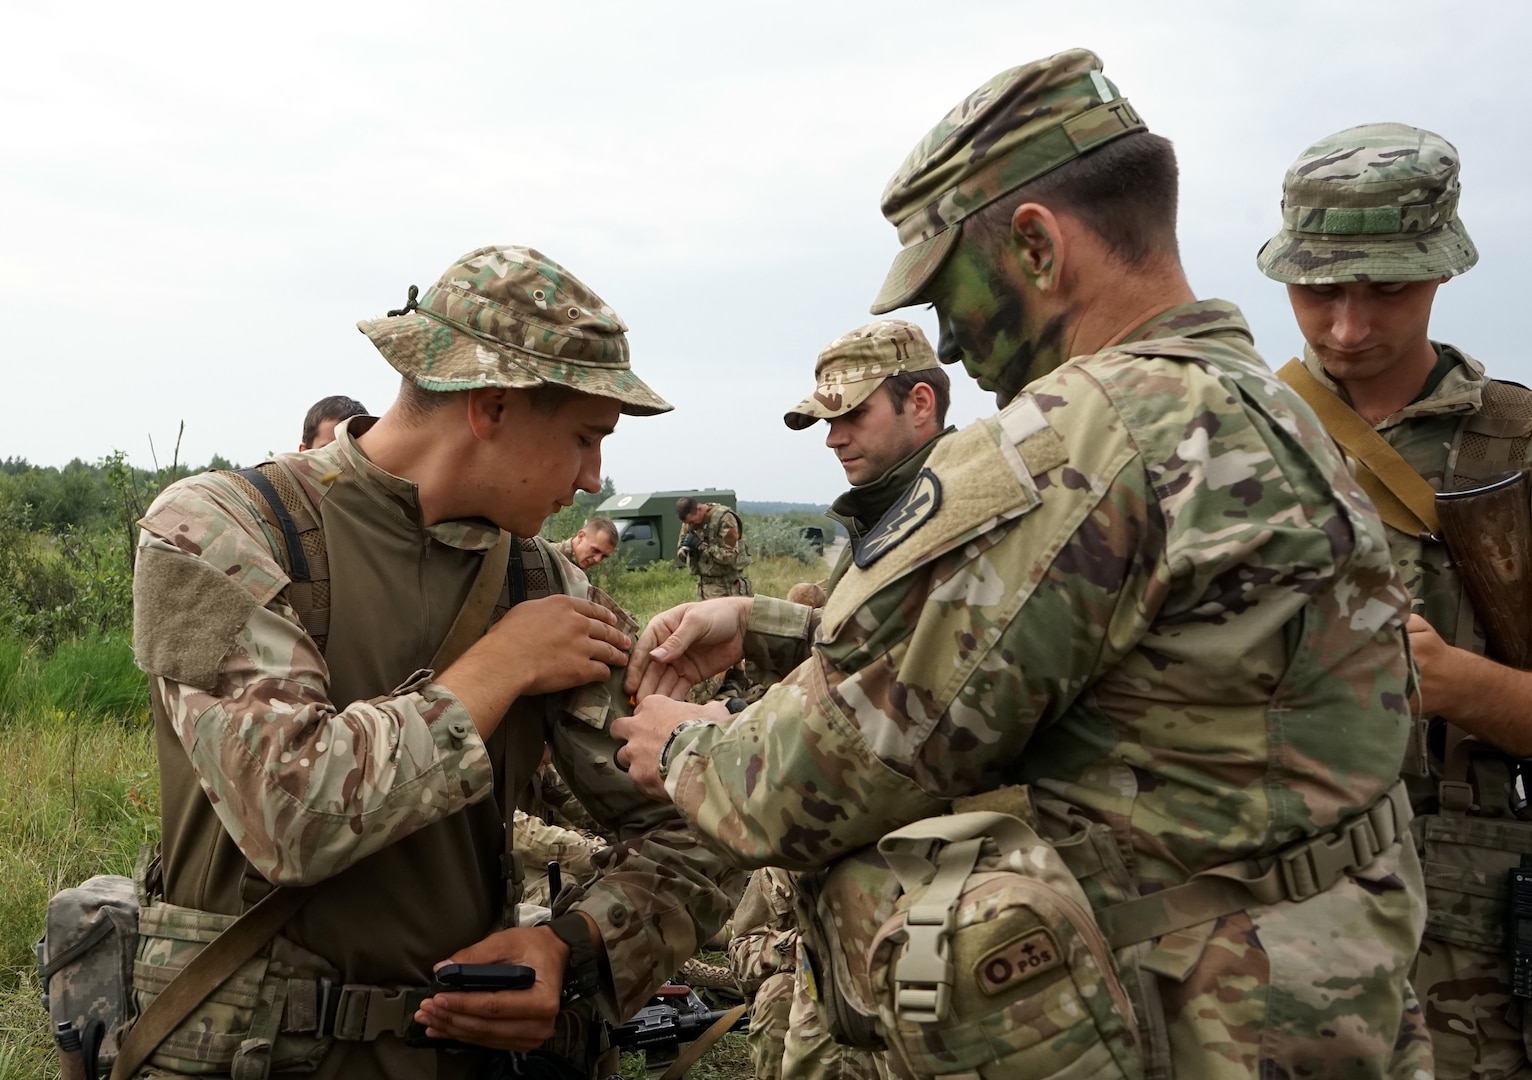 California National Guard Soldiers trade patches with Ukrainian service members at the International Peacekeeping and Security Centre in Yavoriv, Ukraine, Sept 7, 2018. During breaks in training, troops participated in the tradition of swapping patches. The troops also performed tactical training during the multinational Rapid Trident exercise.